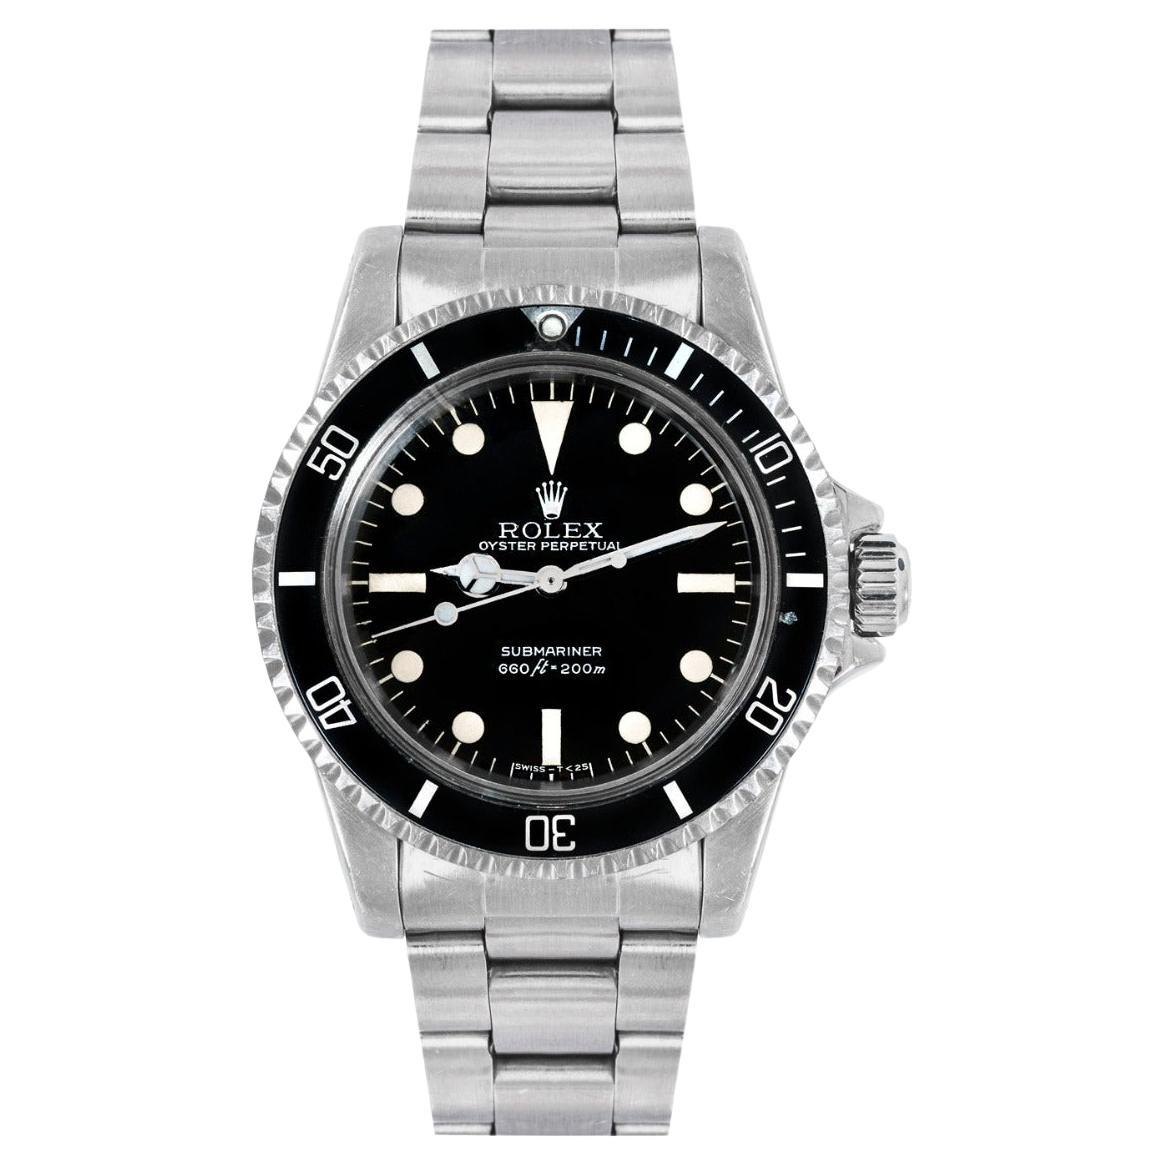 What is a Rolex MilSub?